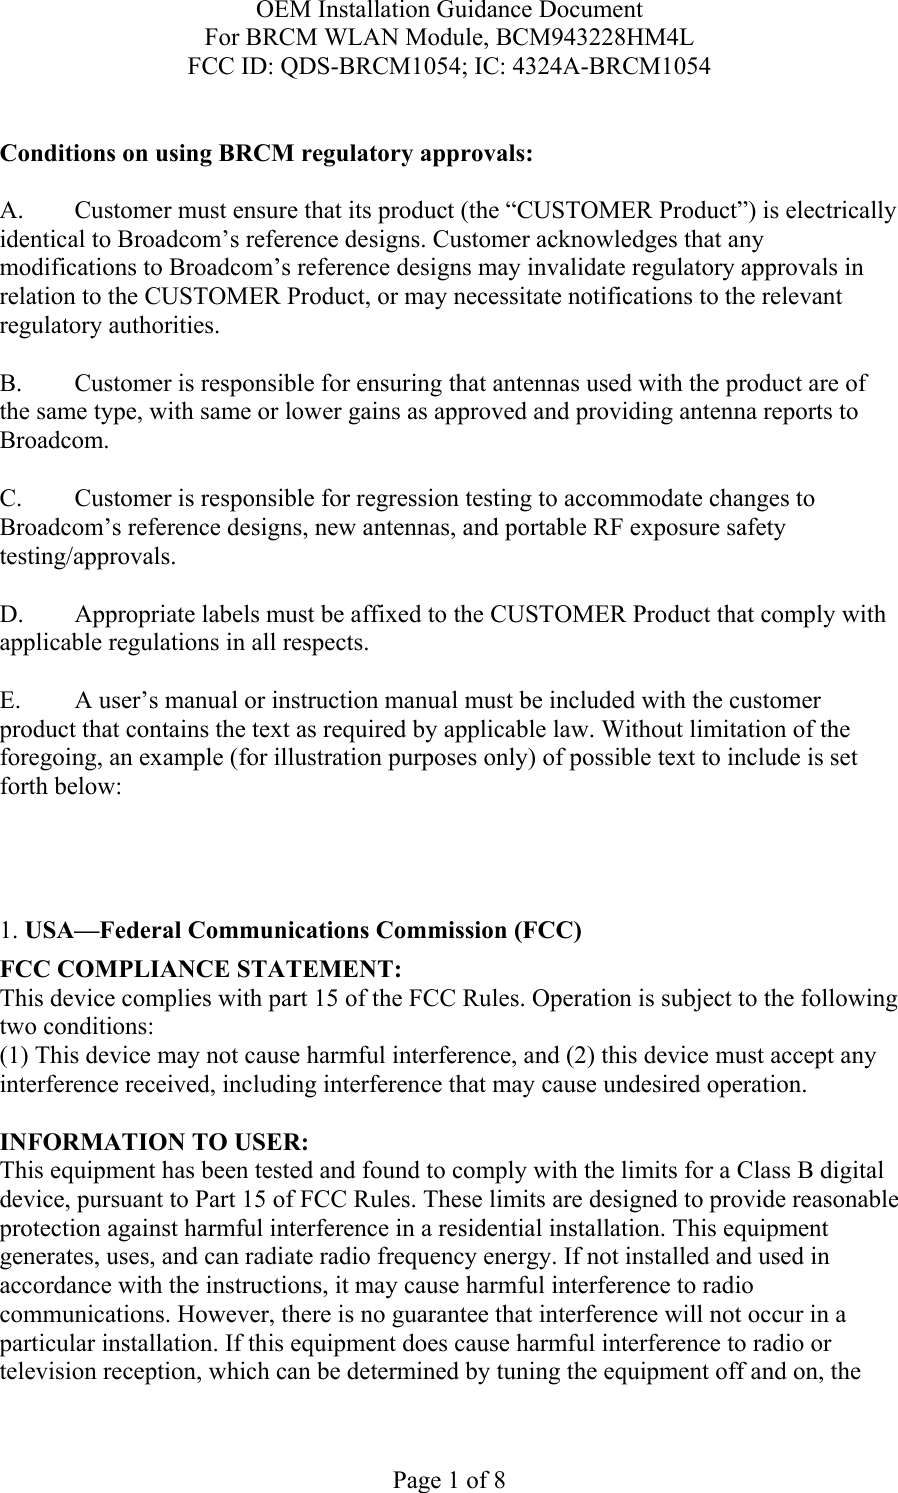 OEM Installation Guidance Document For BRCM WLAN Module, BCM943228HM4L FCC ID: QDS-BRCM1054; IC: 4324A-BRCM1054  Page 1 of 8  Conditions on using BRCM regulatory approvals:   A.  Customer must ensure that its product (the “CUSTOMER Product”) is electrically identical to Broadcom’s reference designs. Customer acknowledges that any modifications to Broadcom’s reference designs may invalidate regulatory approvals in relation to the CUSTOMER Product, or may necessitate notifications to the relevant regulatory authorities.  B.   Customer is responsible for ensuring that antennas used with the product are of the same type, with same or lower gains as approved and providing antenna reports to Broadcom.  C.   Customer is responsible for regression testing to accommodate changes to Broadcom’s reference designs, new antennas, and portable RF exposure safety testing/approvals.  D.  Appropriate labels must be affixed to the CUSTOMER Product that comply with applicable regulations in all respects.    E.  A user’s manual or instruction manual must be included with the customer product that contains the text as required by applicable law. Without limitation of the foregoing, an example (for illustration purposes only) of possible text to include is set forth below:      1. USA—Federal Communications Commission (FCC) FCC COMPLIANCE STATEMENT: This device complies with part 15 of the FCC Rules. Operation is subject to the following two conditions: (1) This device may not cause harmful interference, and (2) this device must accept any interference received, including interference that may cause undesired operation.  INFORMATION TO USER: This equipment has been tested and found to comply with the limits for a Class B digital device, pursuant to Part 15 of FCC Rules. These limits are designed to provide reasonable protection against harmful interference in a residential installation. This equipment generates, uses, and can radiate radio frequency energy. If not installed and used in accordance with the instructions, it may cause harmful interference to radio communications. However, there is no guarantee that interference will not occur in a particular installation. If this equipment does cause harmful interference to radio or television reception, which can be determined by tuning the equipment off and on, the 